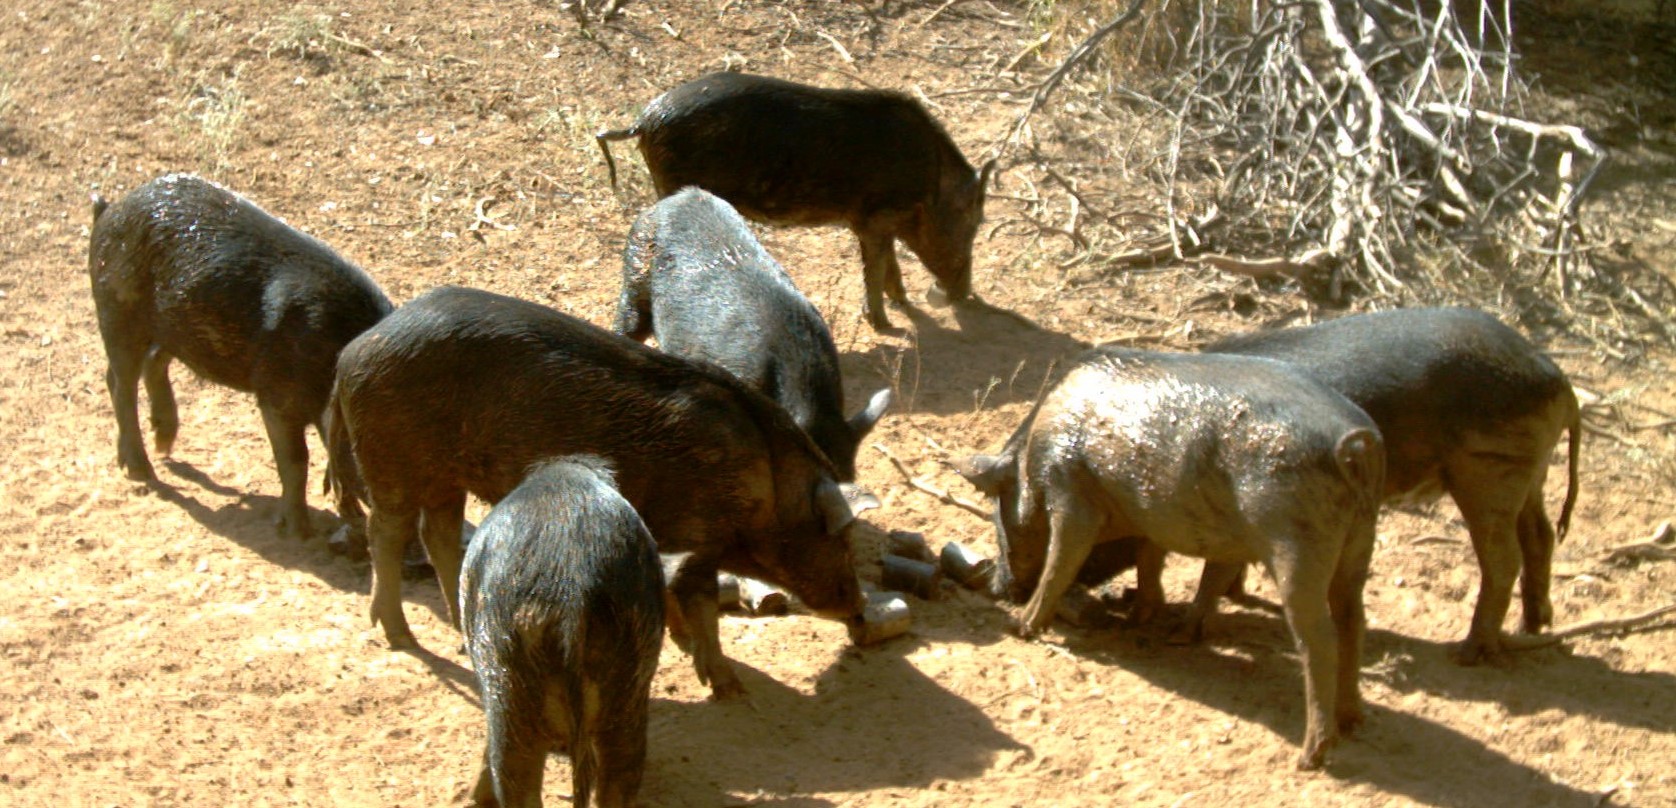 Seven pigs eating meat baits from ground